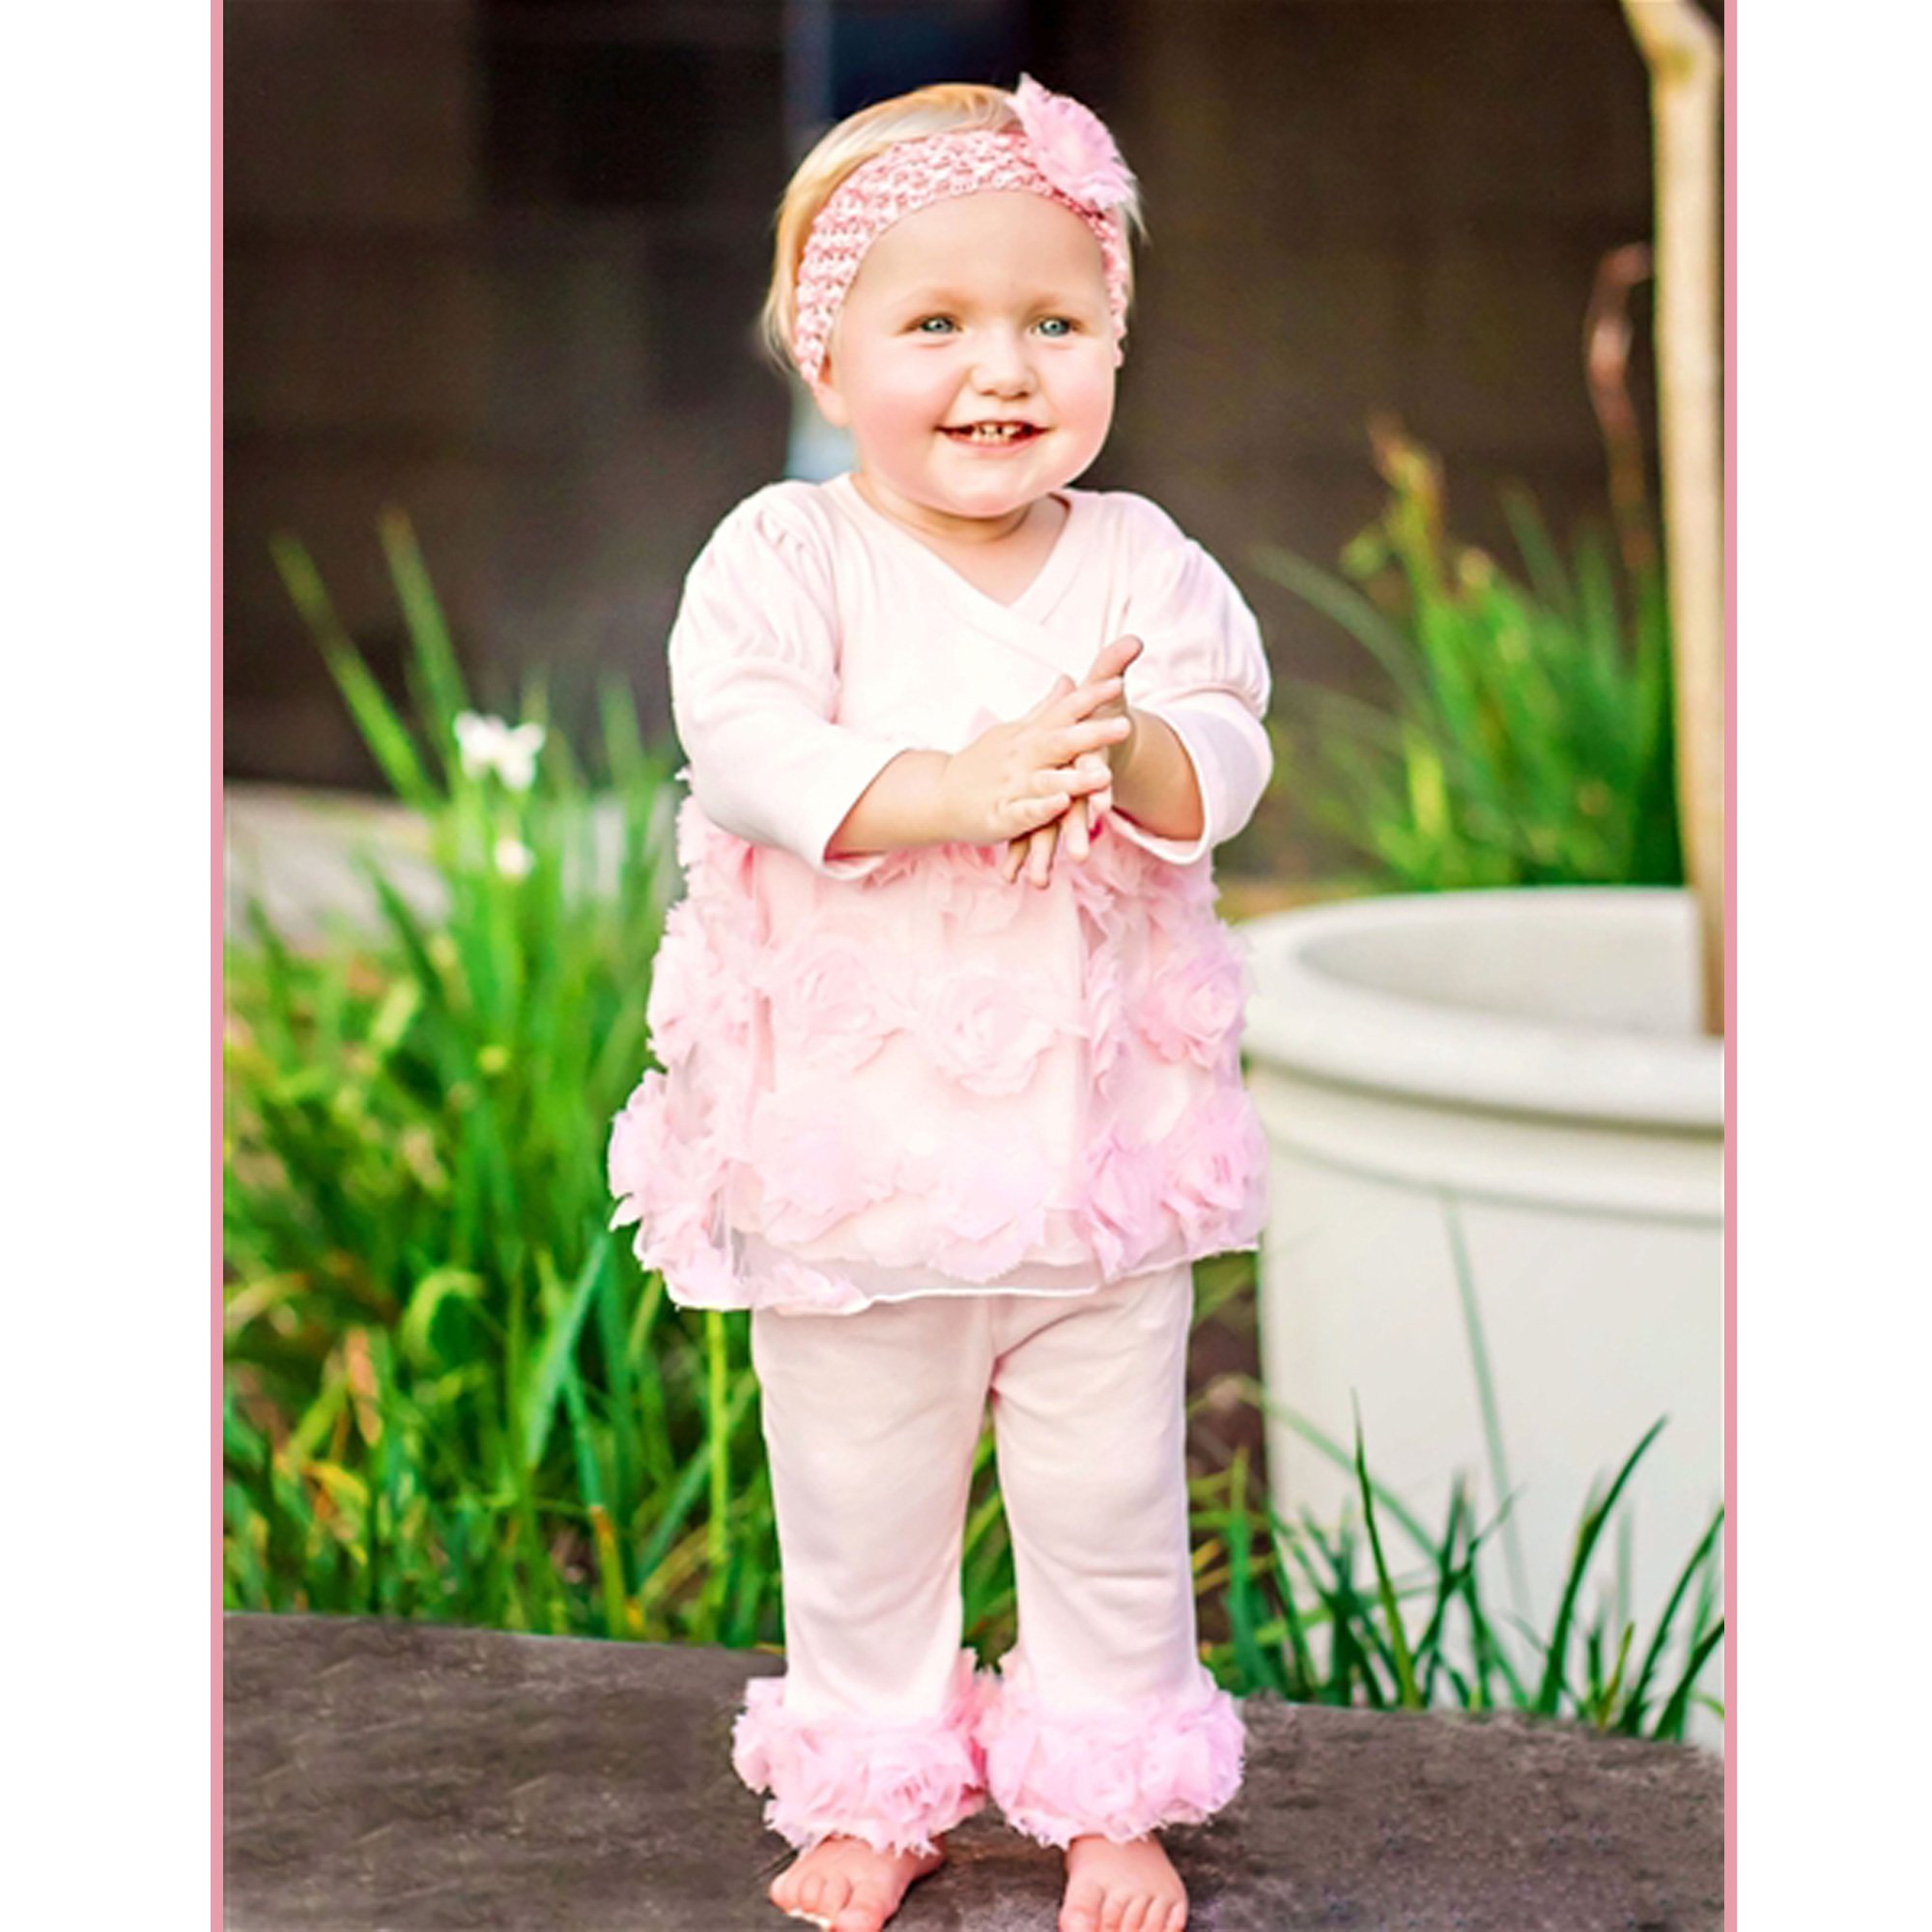 𝐞𝐝𝐢𝐭𝐞𝐝 𝐛𝐲 𝐞𝐦𝐦𝐚  Cute baby girl outfits, Cute baby clothes,  Cute baby photos